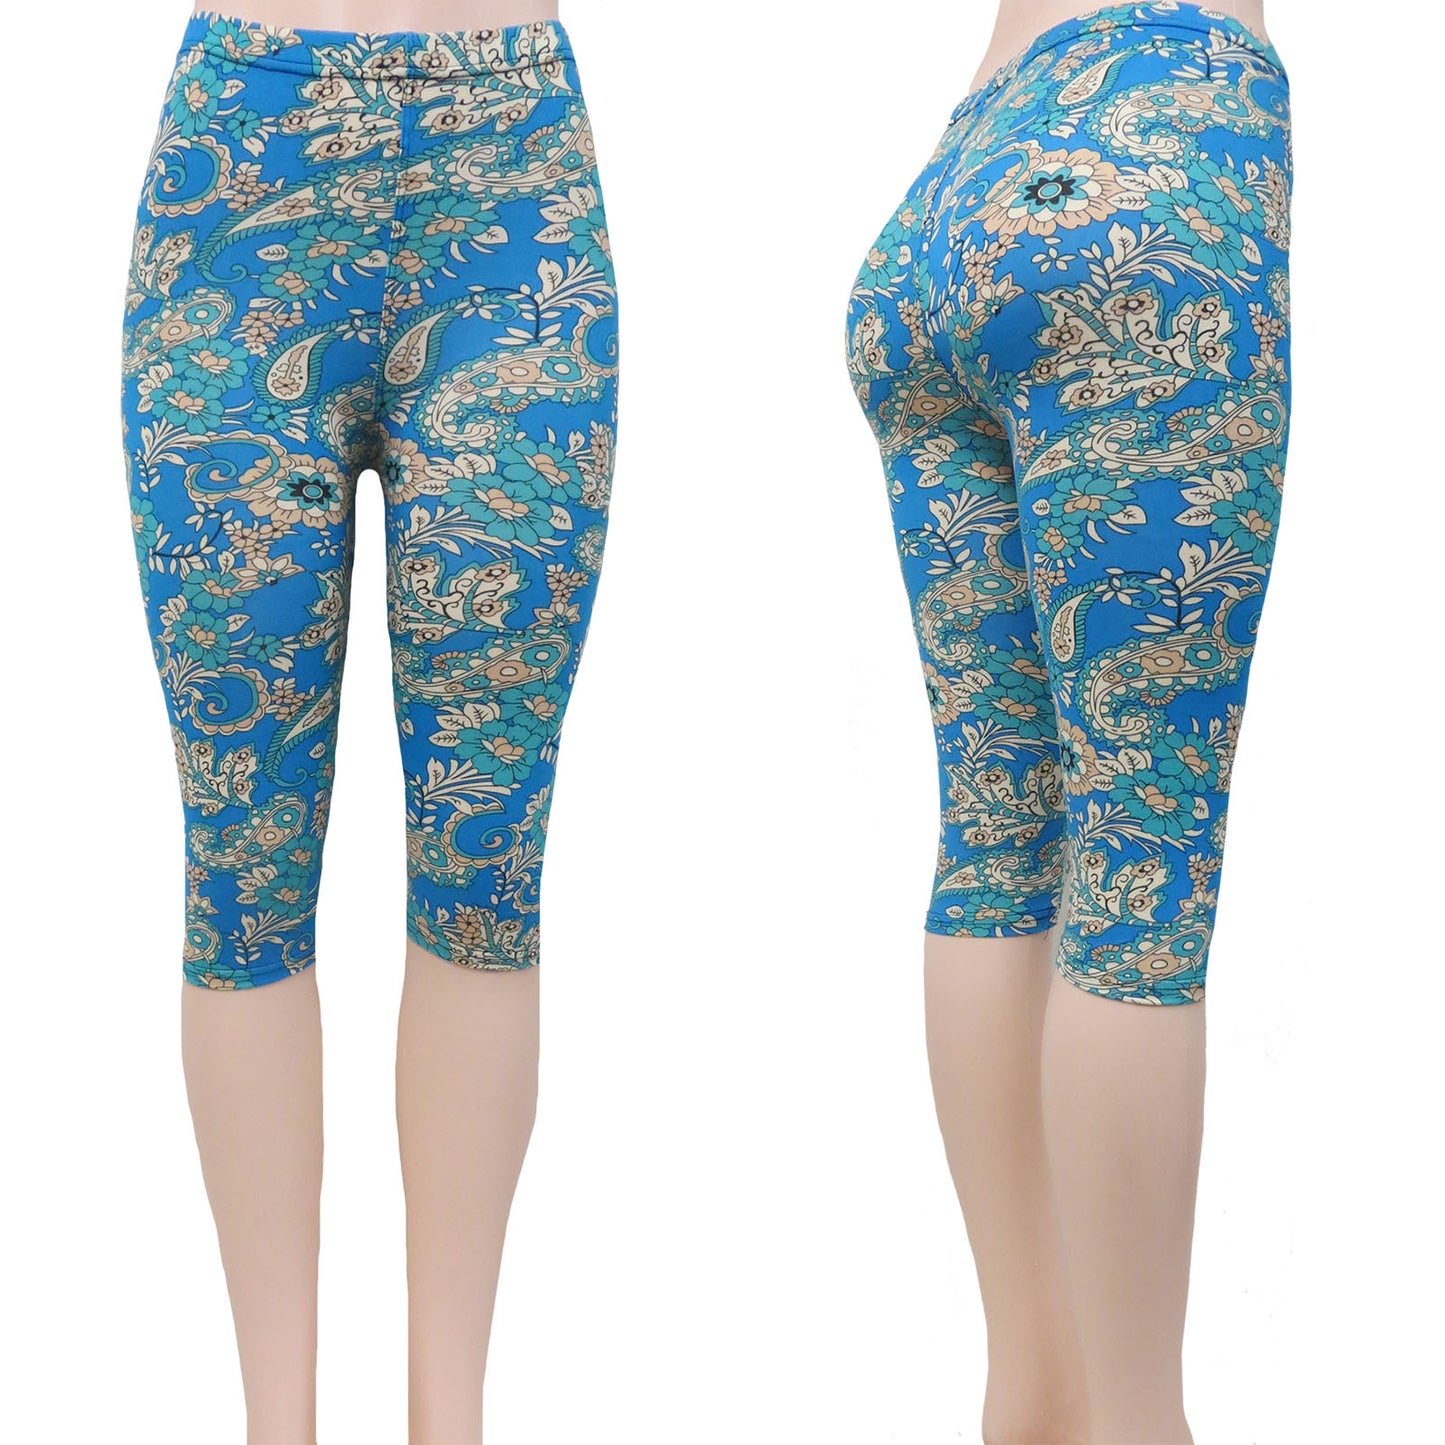 ITEM NUMBER: AP730-CHARLIZE (12 PIECE PACK WAS $2.75 - CLEARANCE SALE JUST $1.50 / PIECE) MULTICOLOR PATTERNED CAPRI LEGGINGS